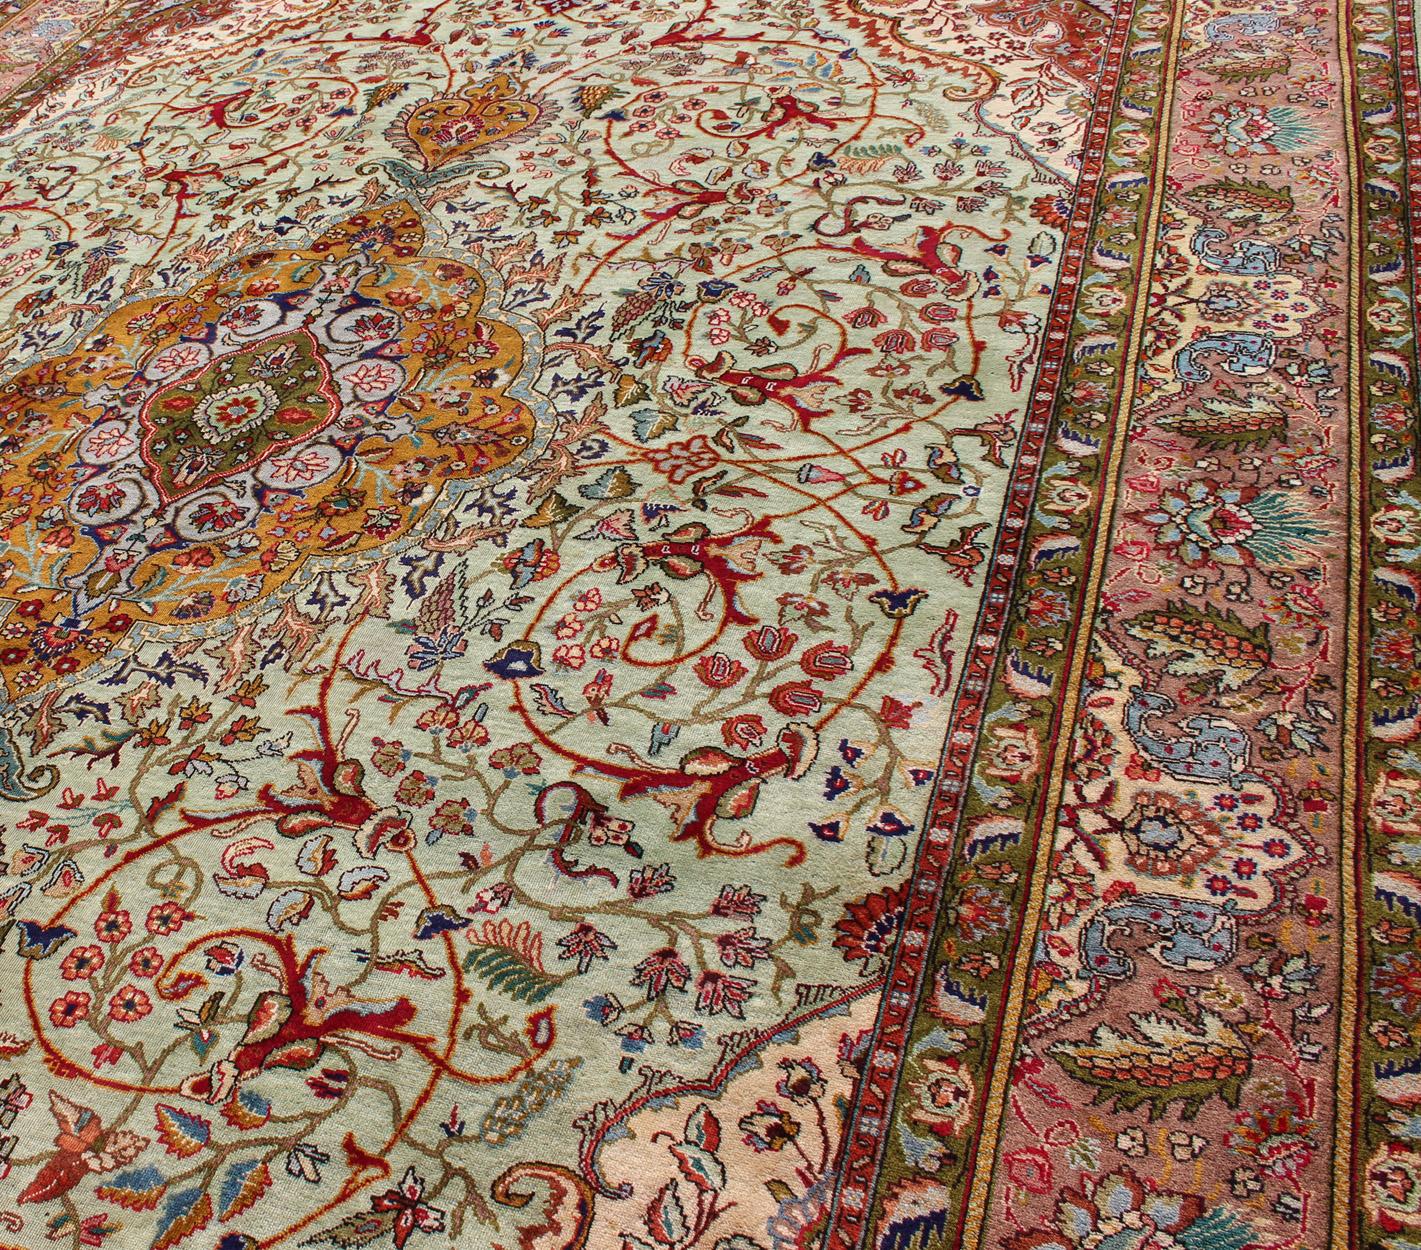 20th Century Classic Persian Tabriz Vintage Rug in Celadon Green, Salmon and Multi-Colors For Sale